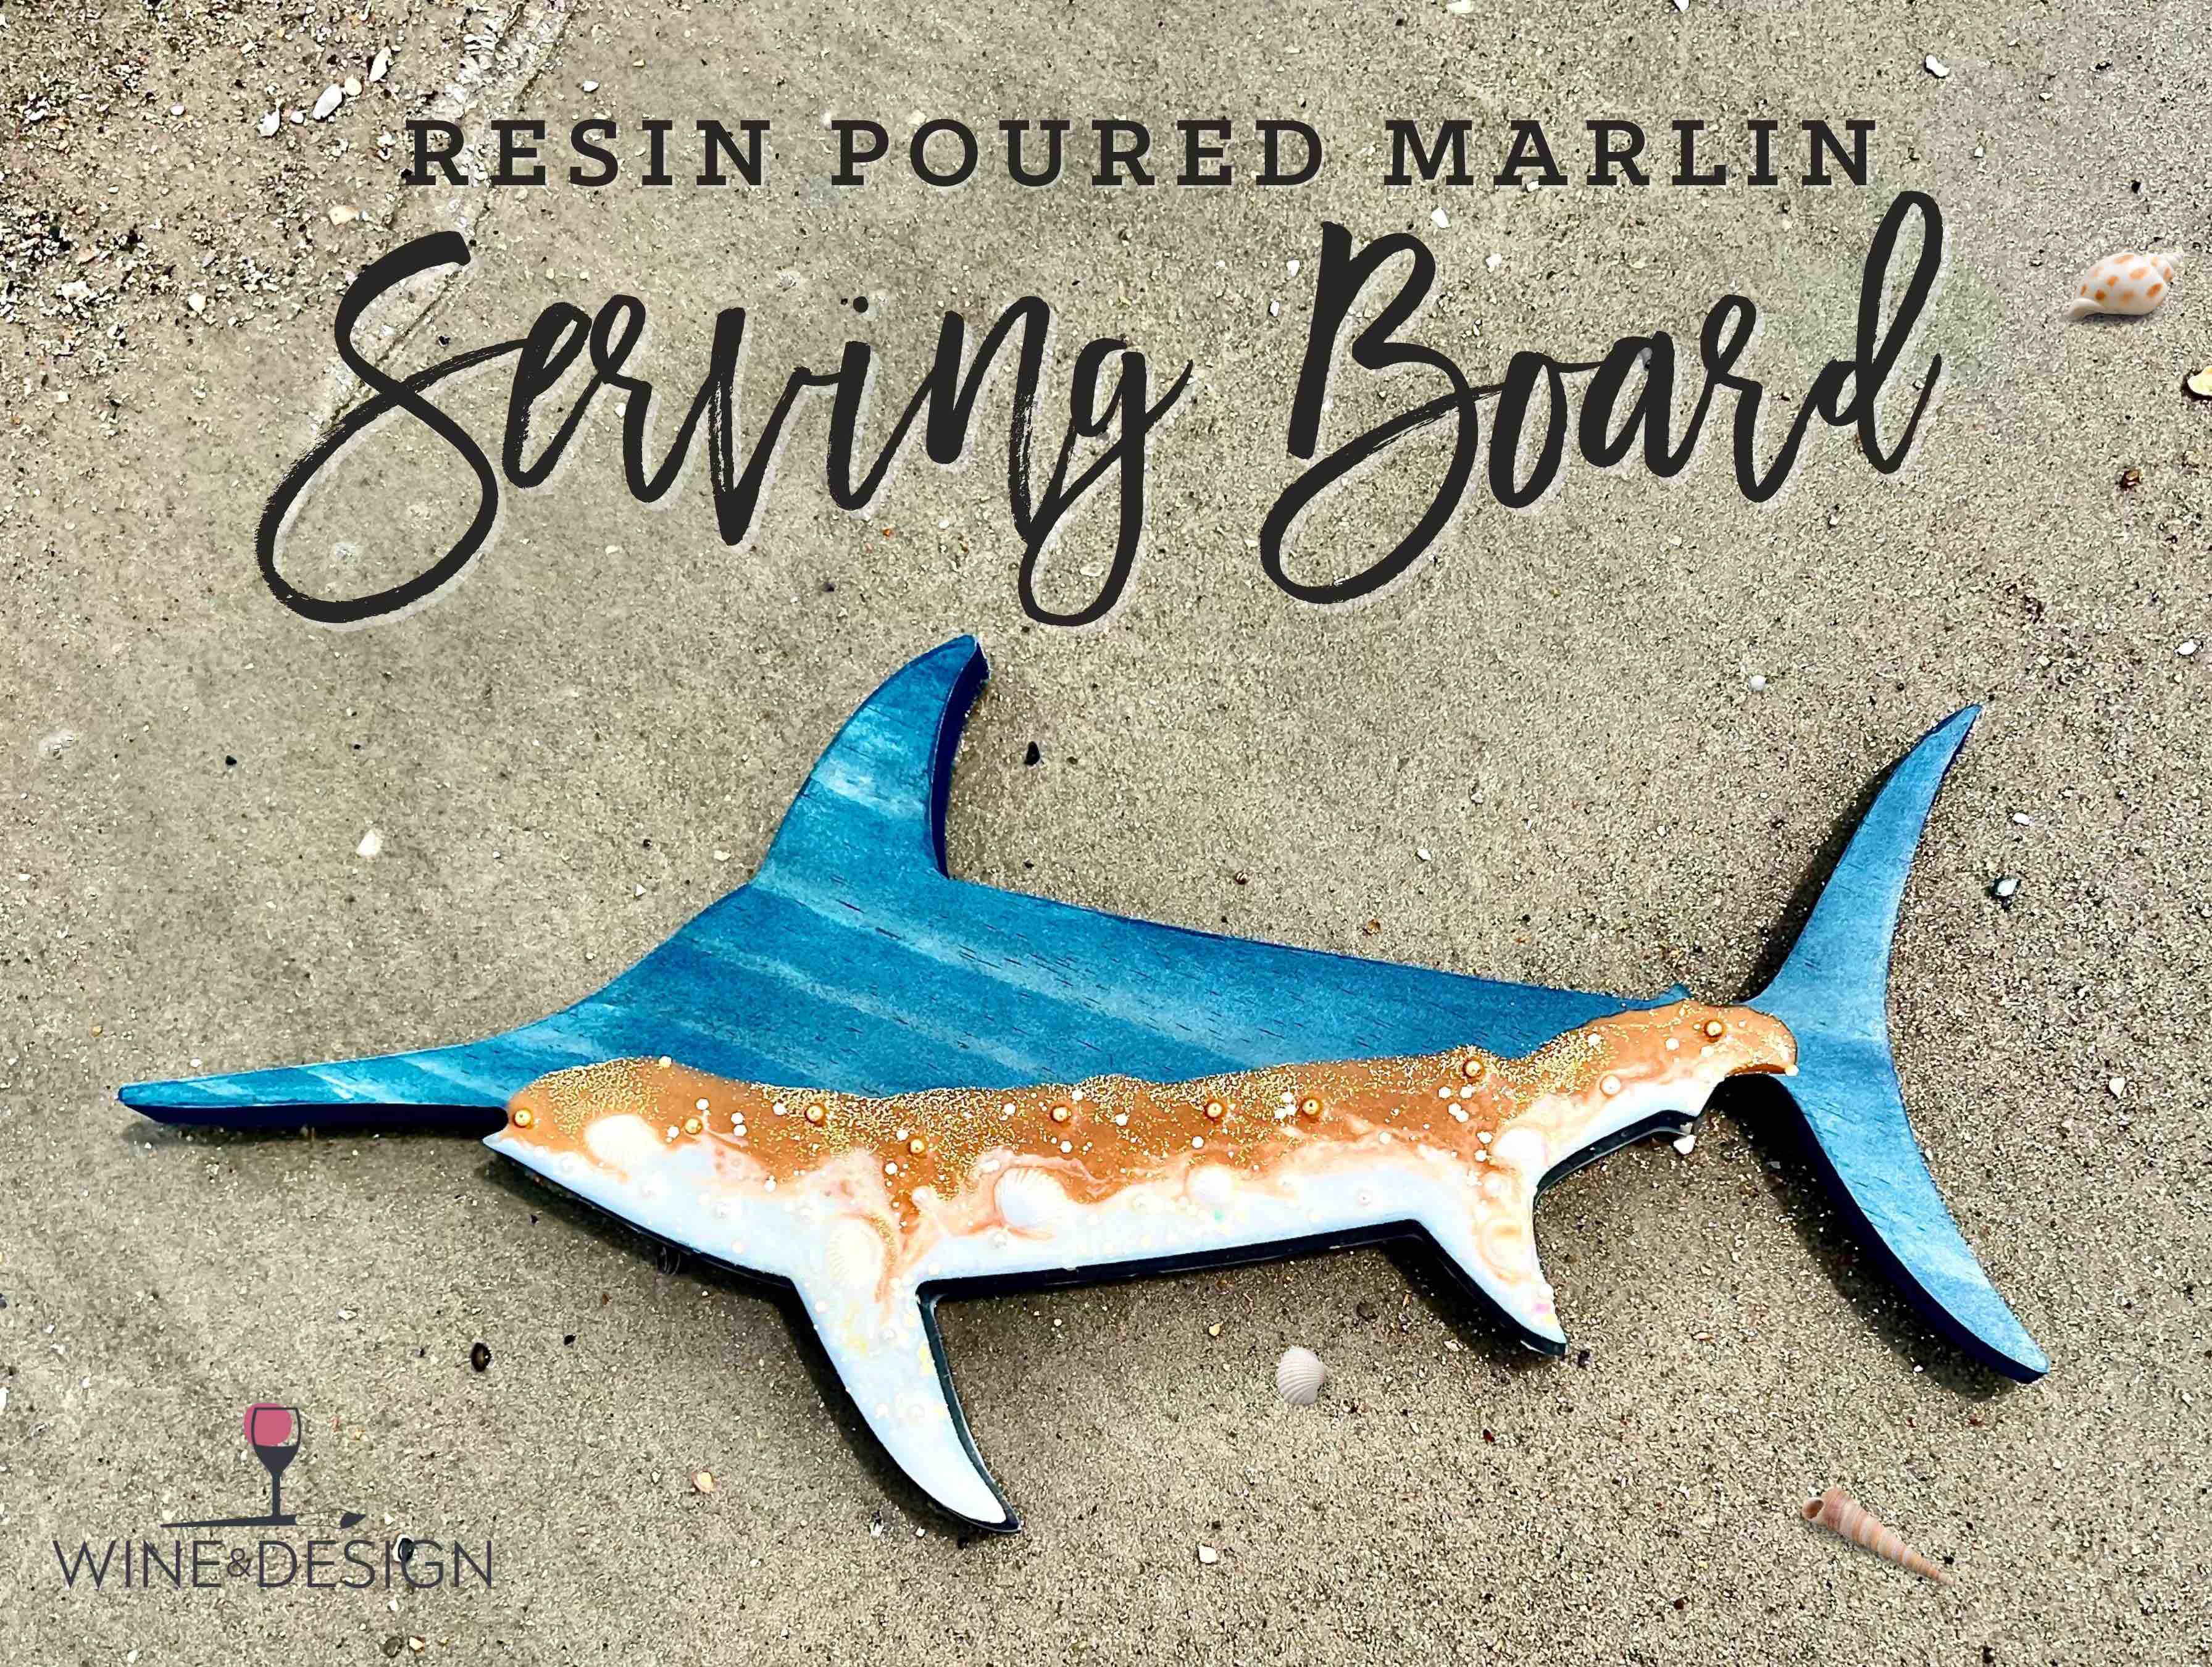 Resin Poured Marlin Serving Board